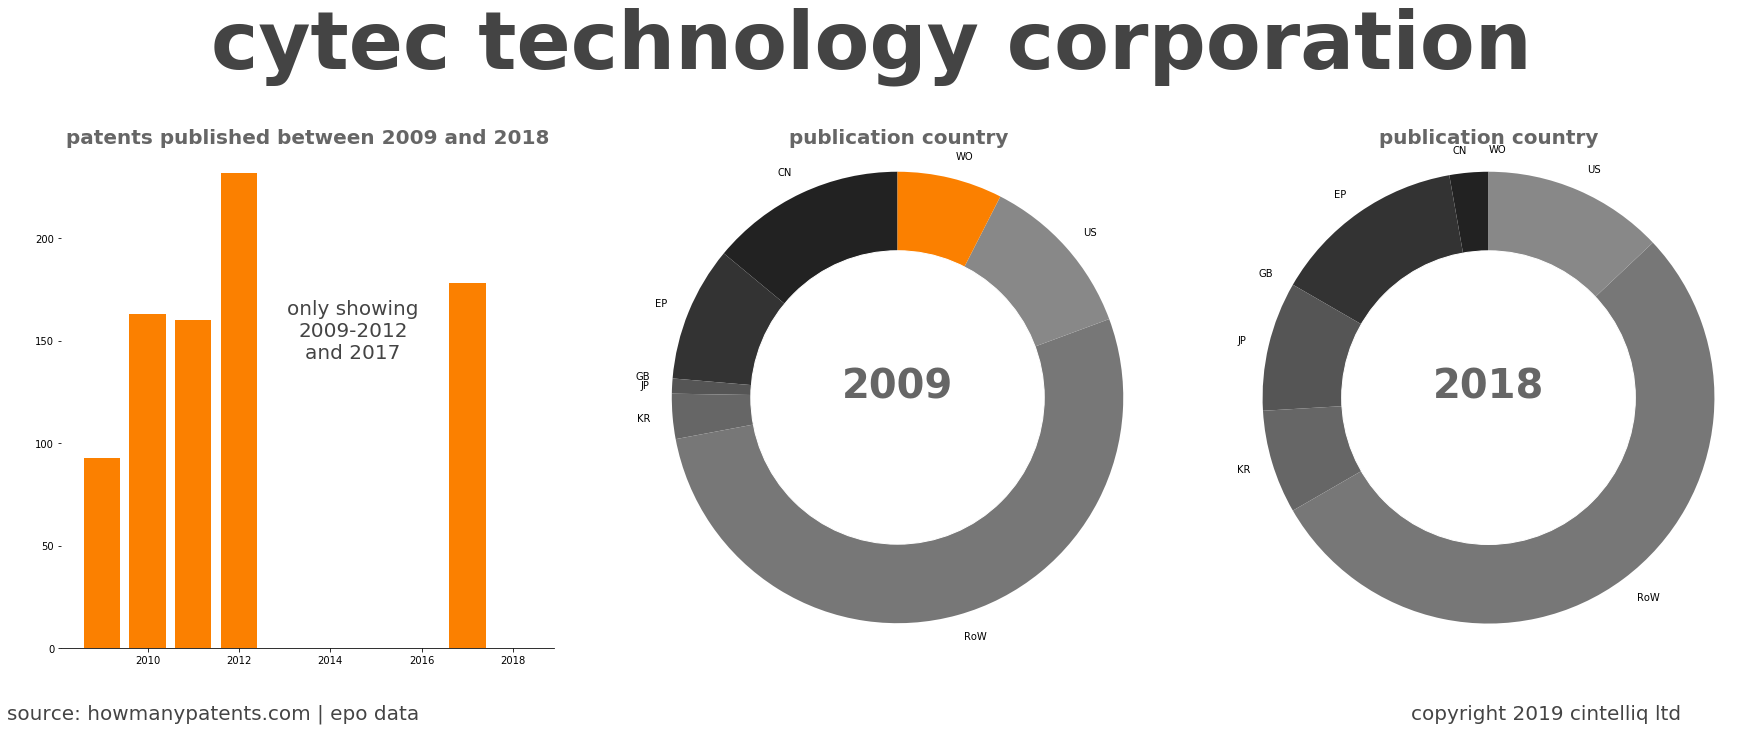 summary of patents for Cytec Technology Corporation